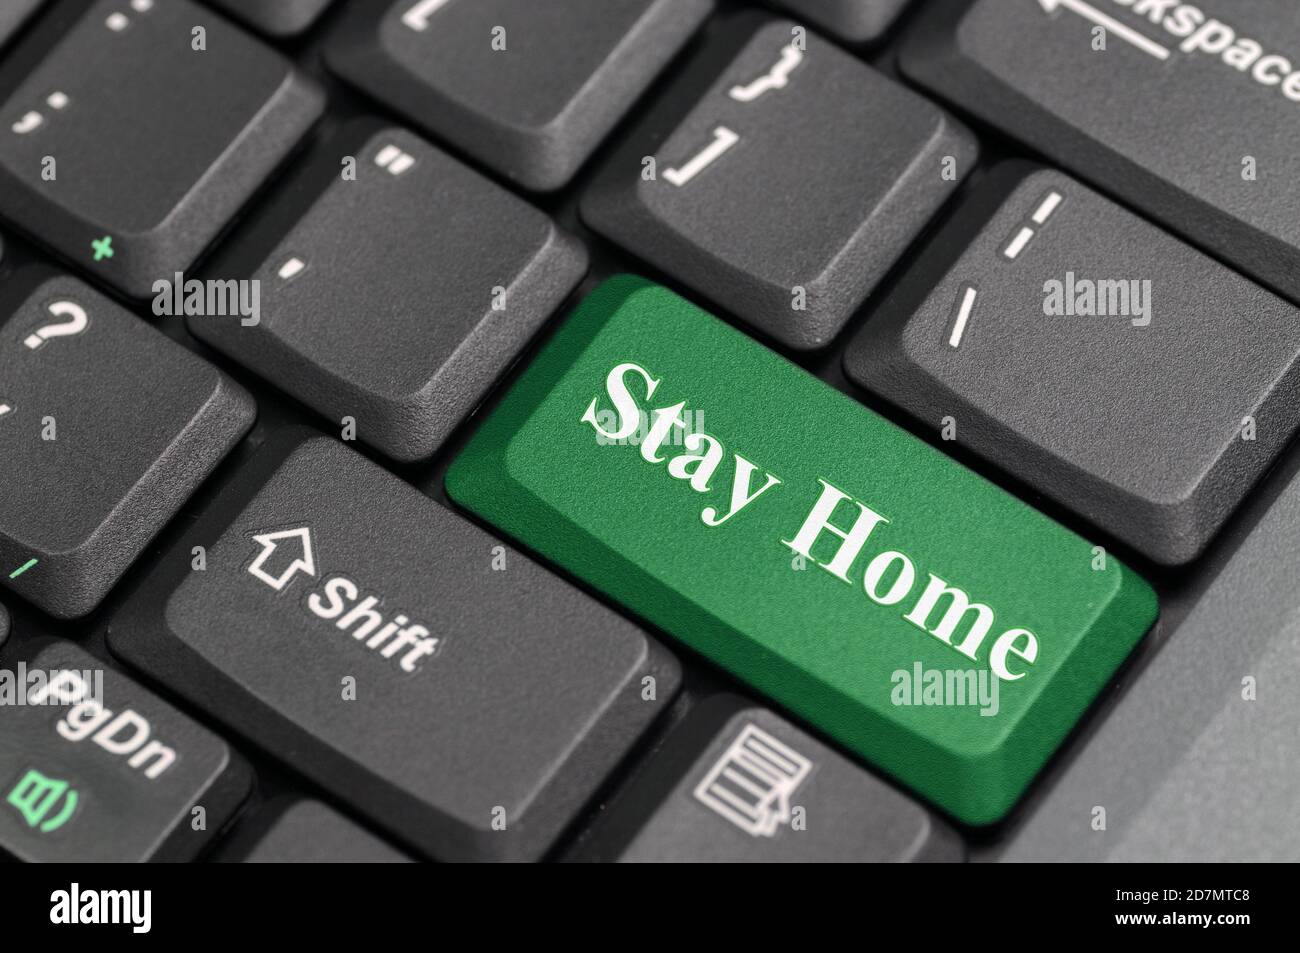 Stay home key on keyboard Stock Photo